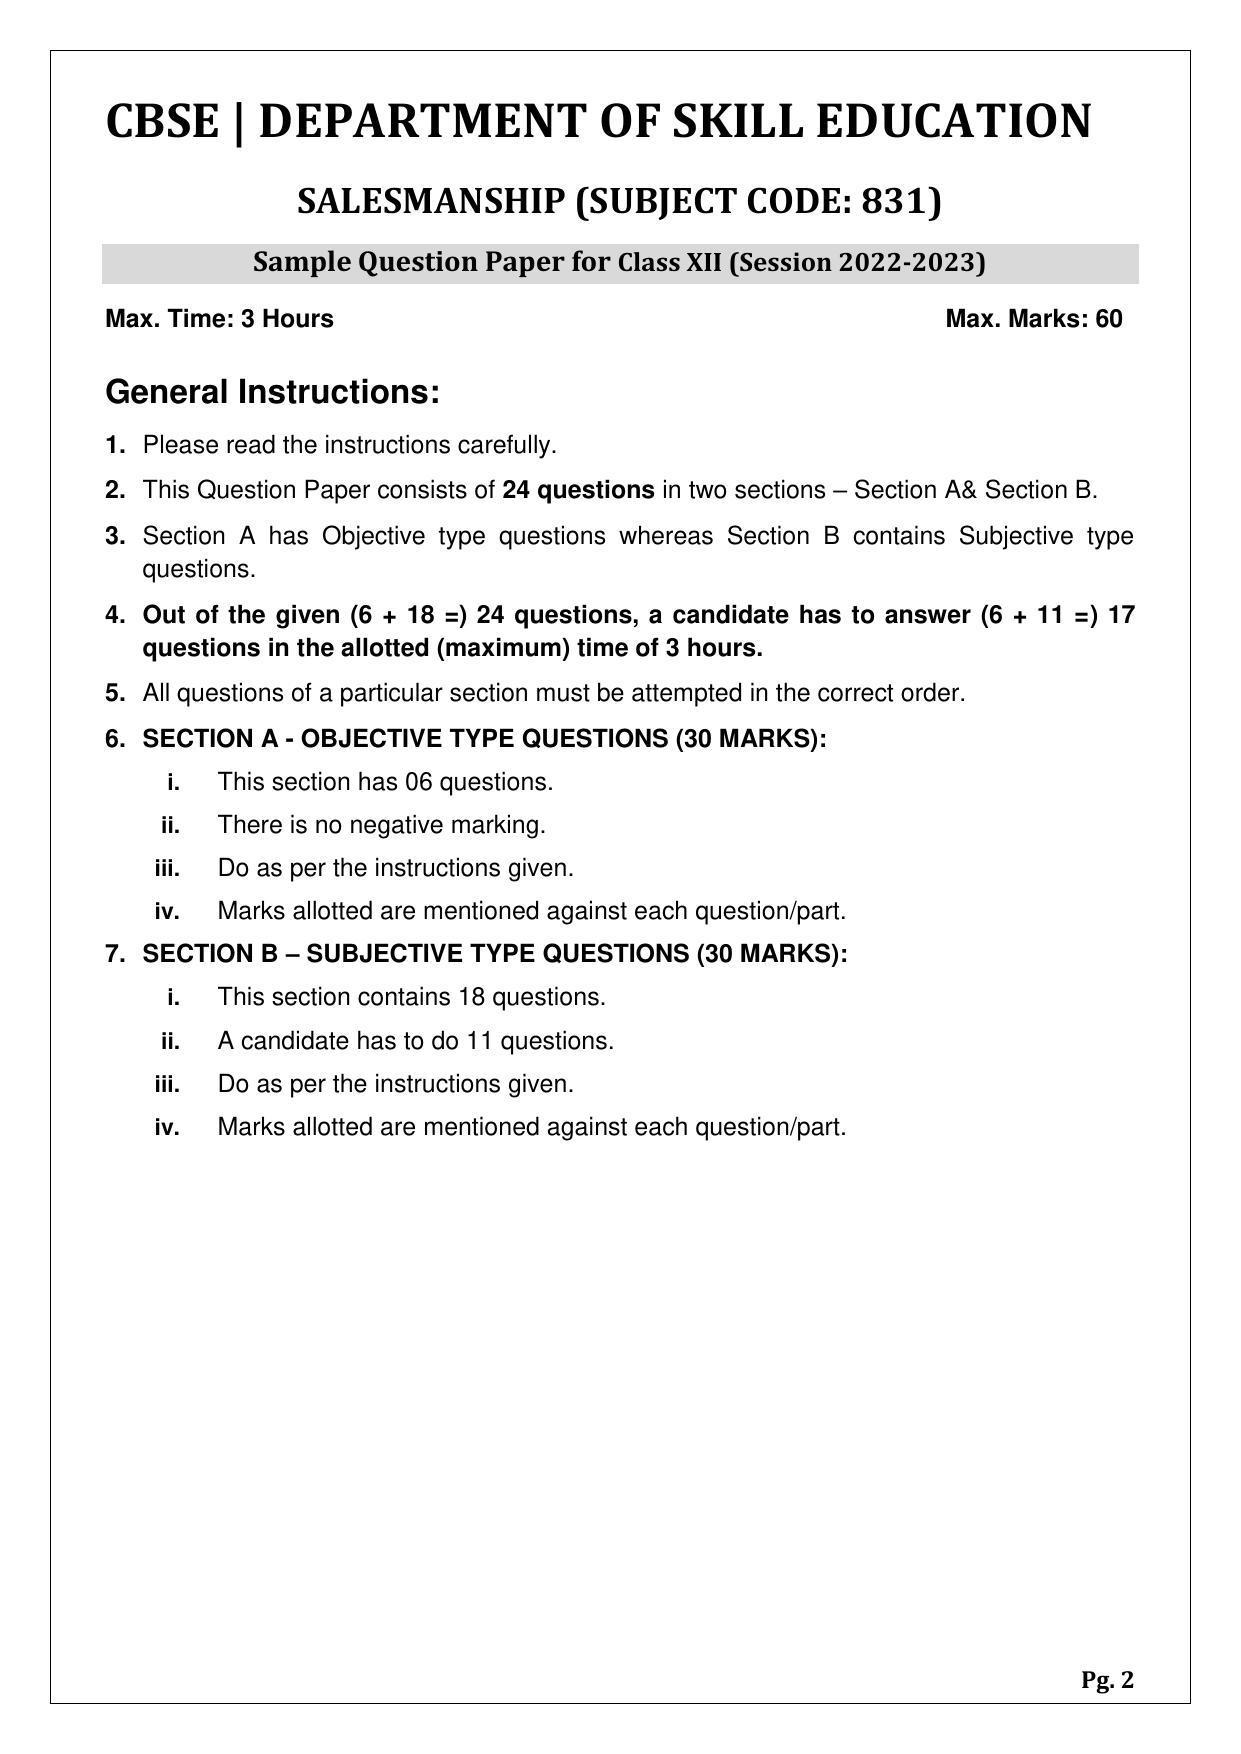 CBSE Class 12 Salesmanship (Skill Education) Sample Papers 2023 - Page 2